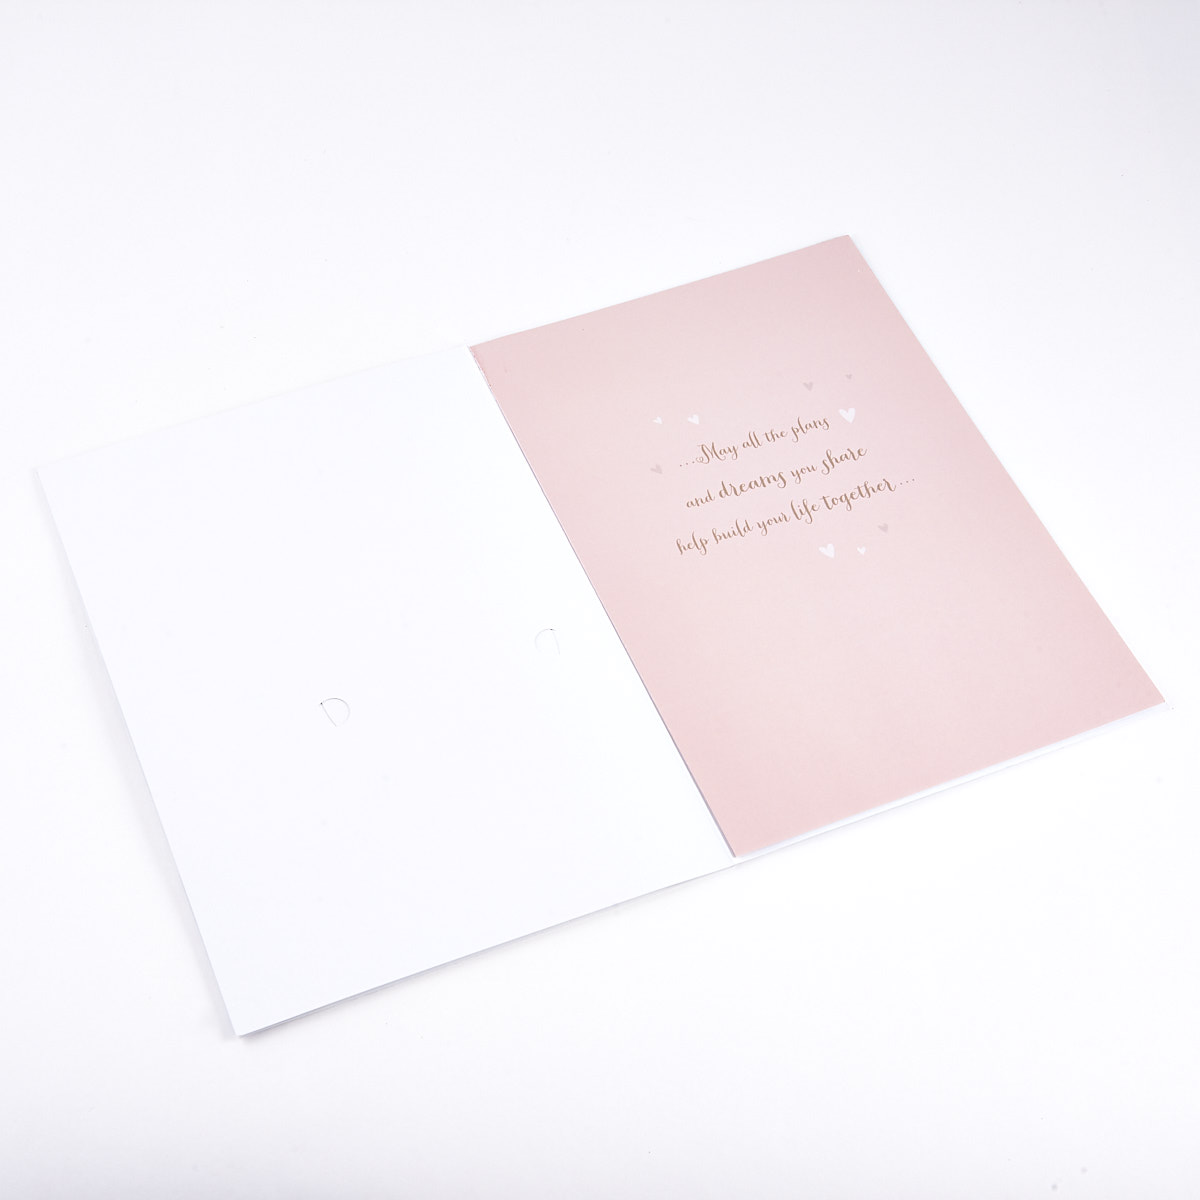 Wedding Card - All You Need Is Love